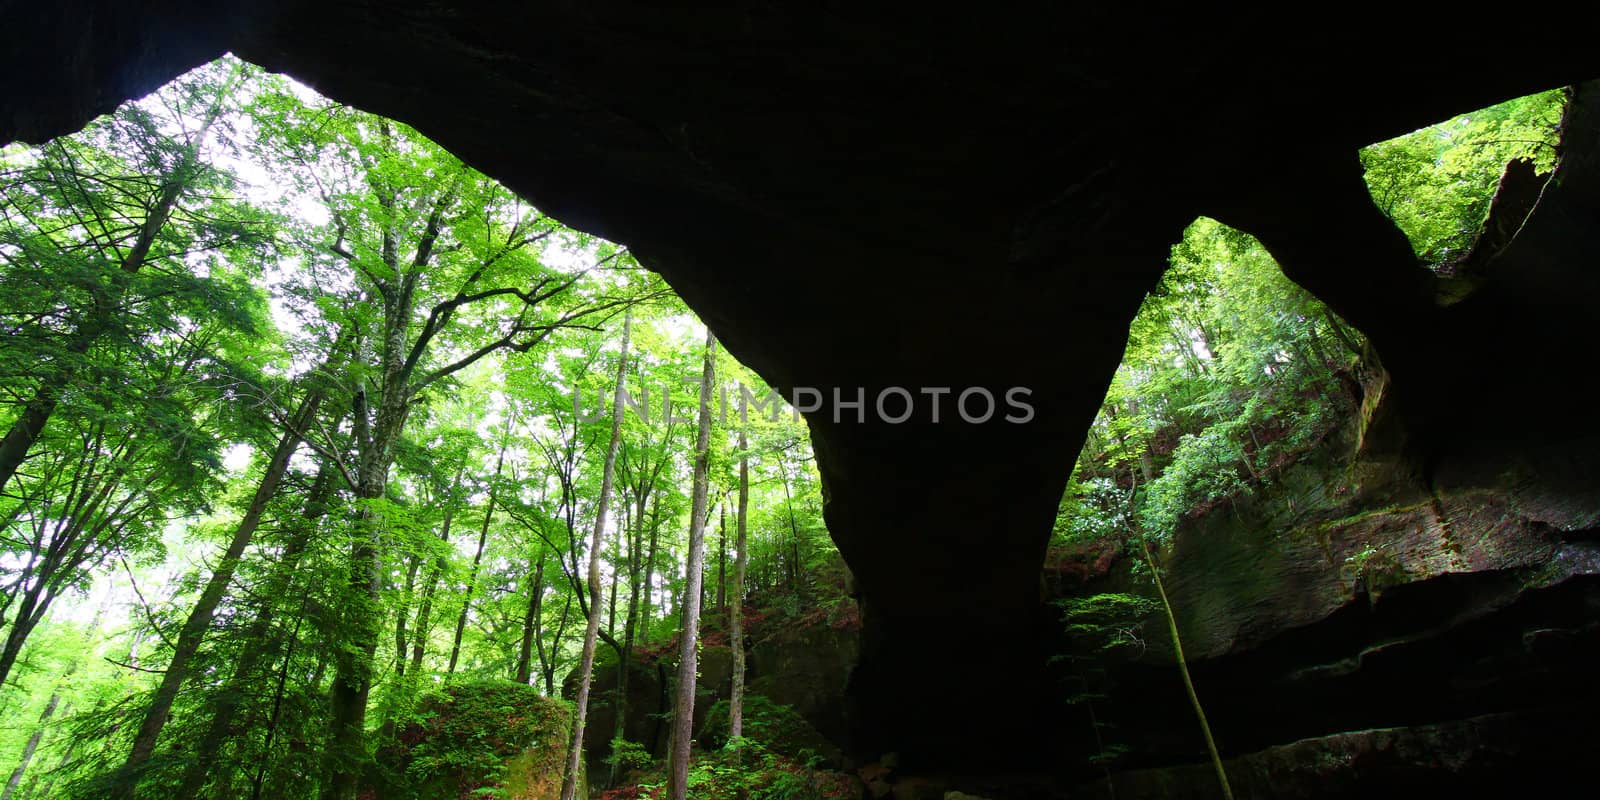 Giant Natural Bridge spans the lush forests of Alabama - USA.